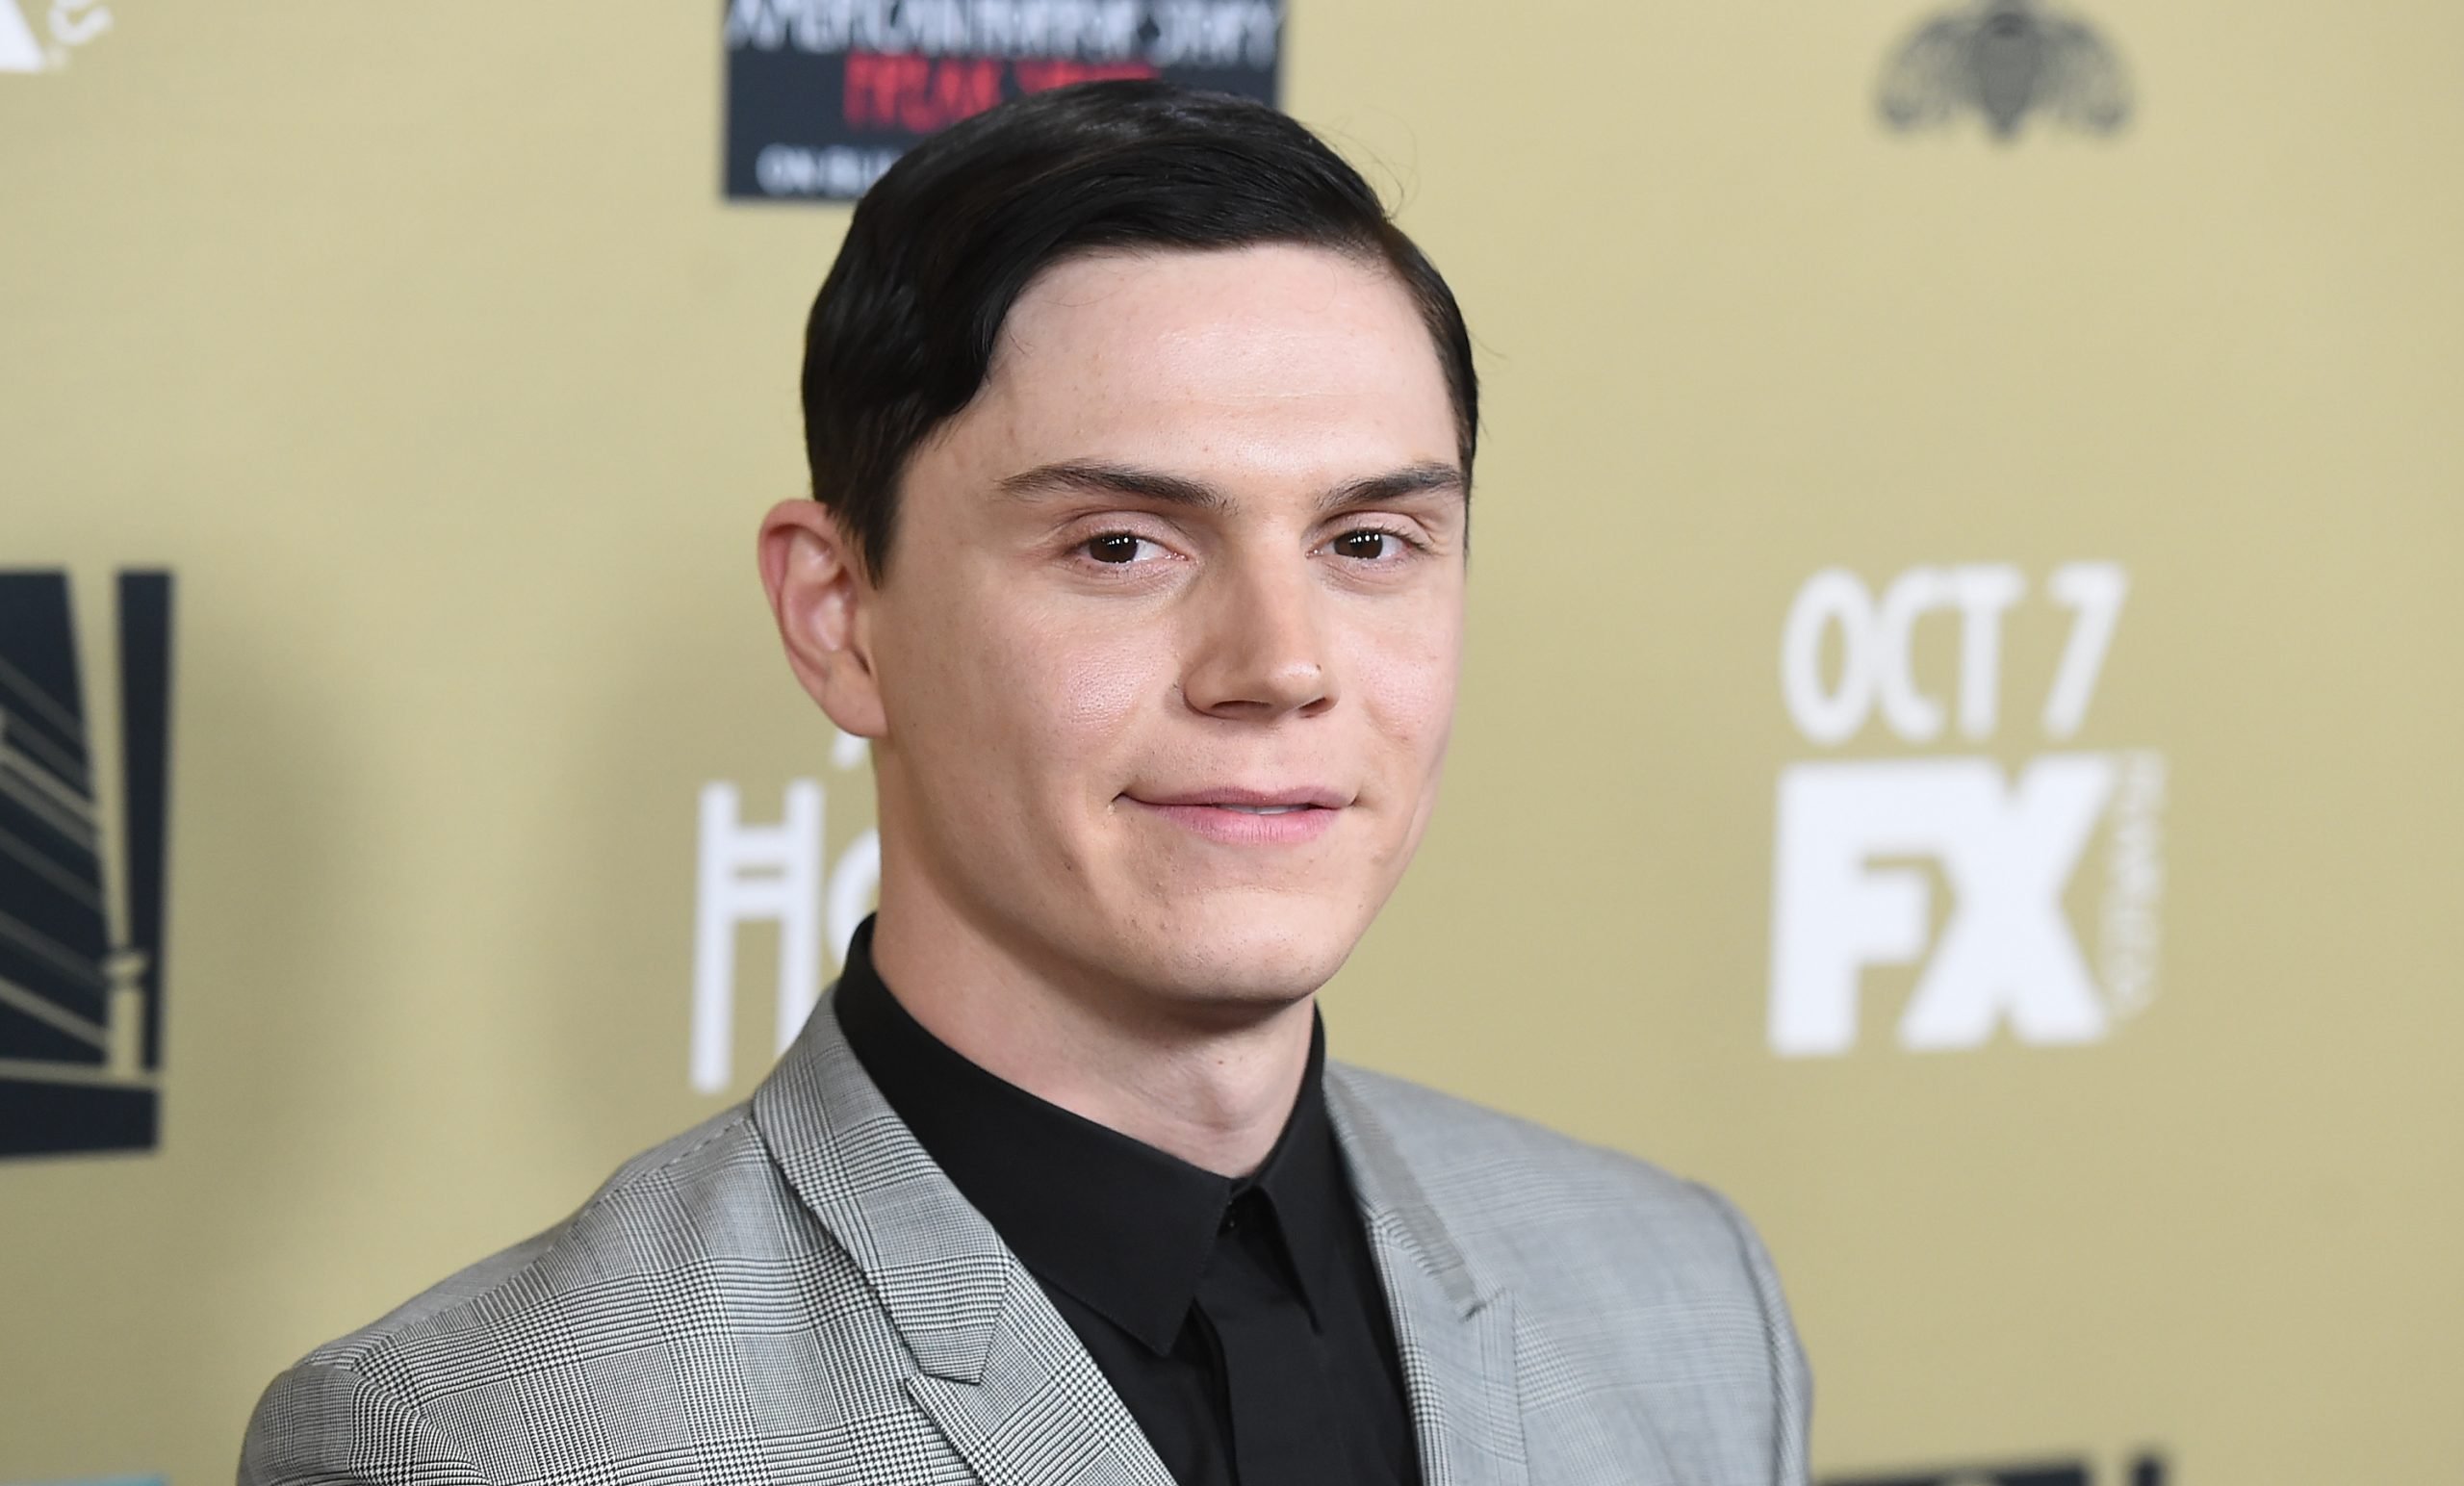 Evan Peters at the premiere screening of FX's 'American Horror Story: Hotel' on Oct. 3, 2015